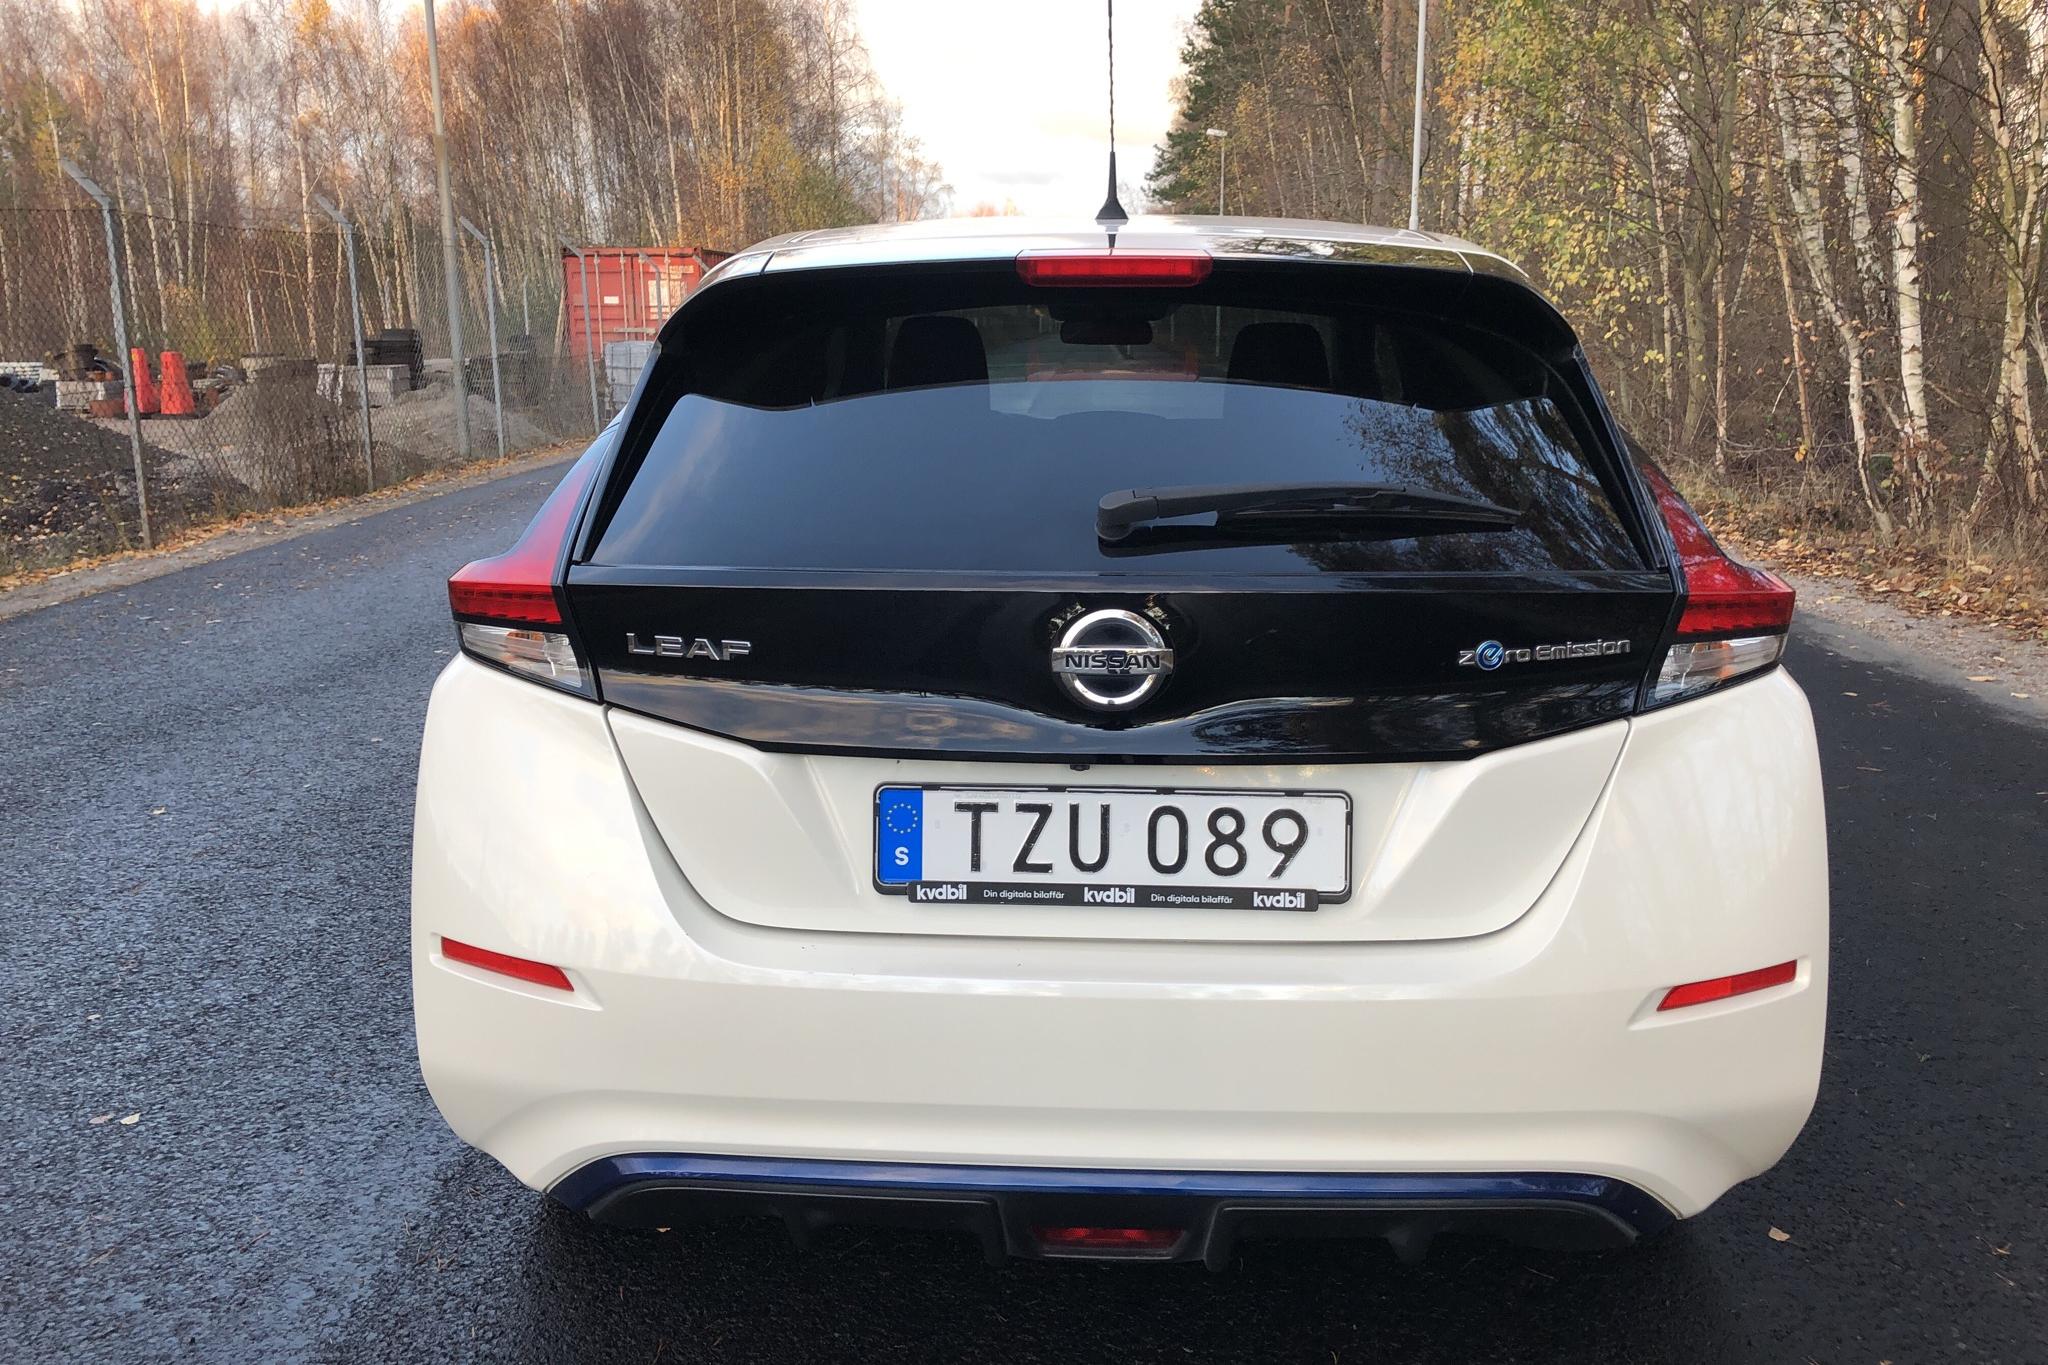 Nissan LEAF 5dr 40 kWh (150hk) - 59 850 km - Automatic - white - 2018